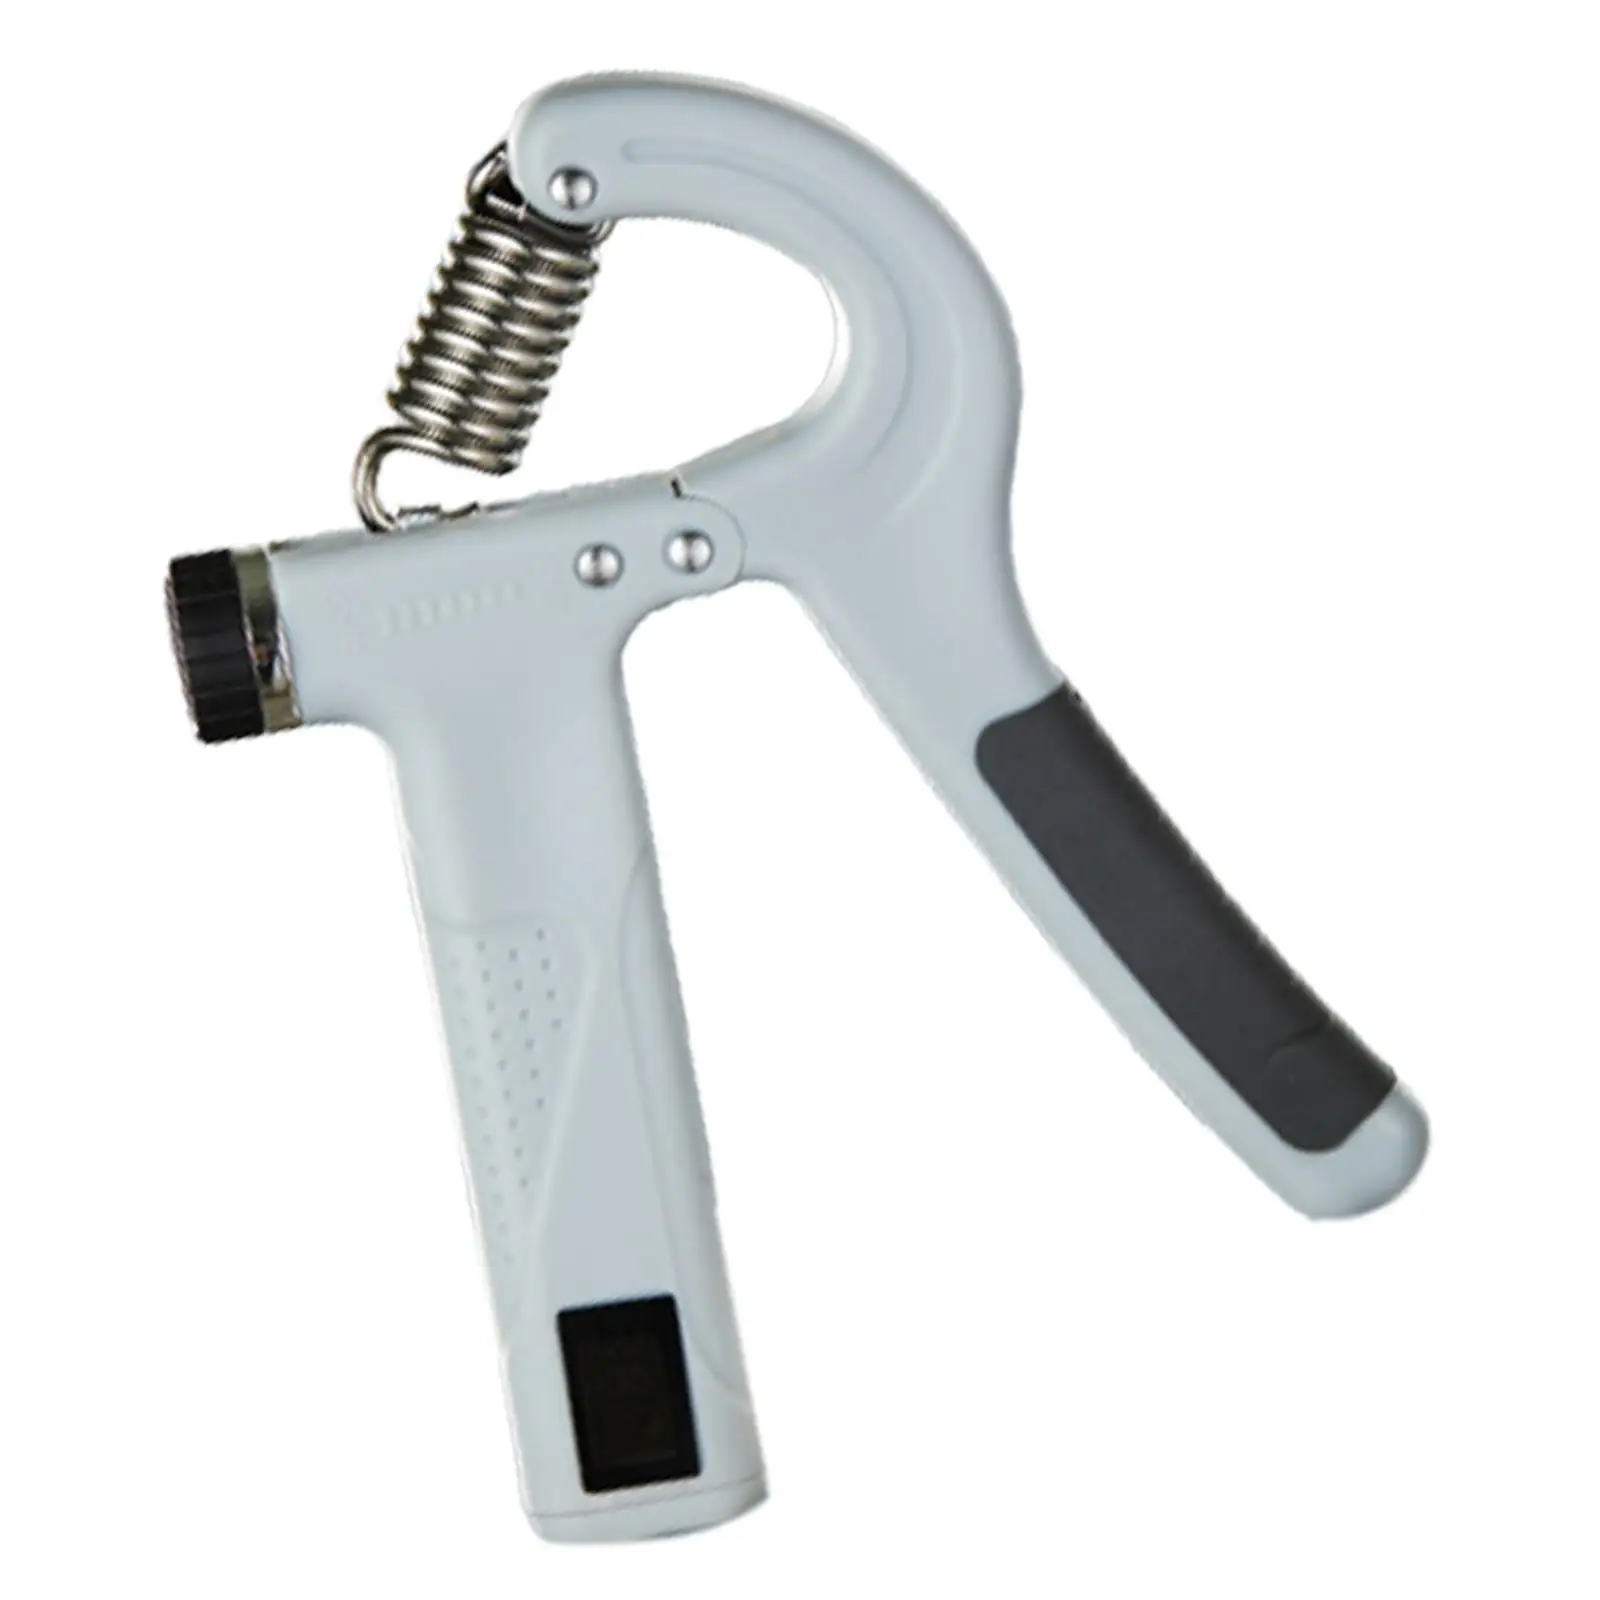 Hand Grip Strengthener with Counter Player Piano Musician Finger Exerciser